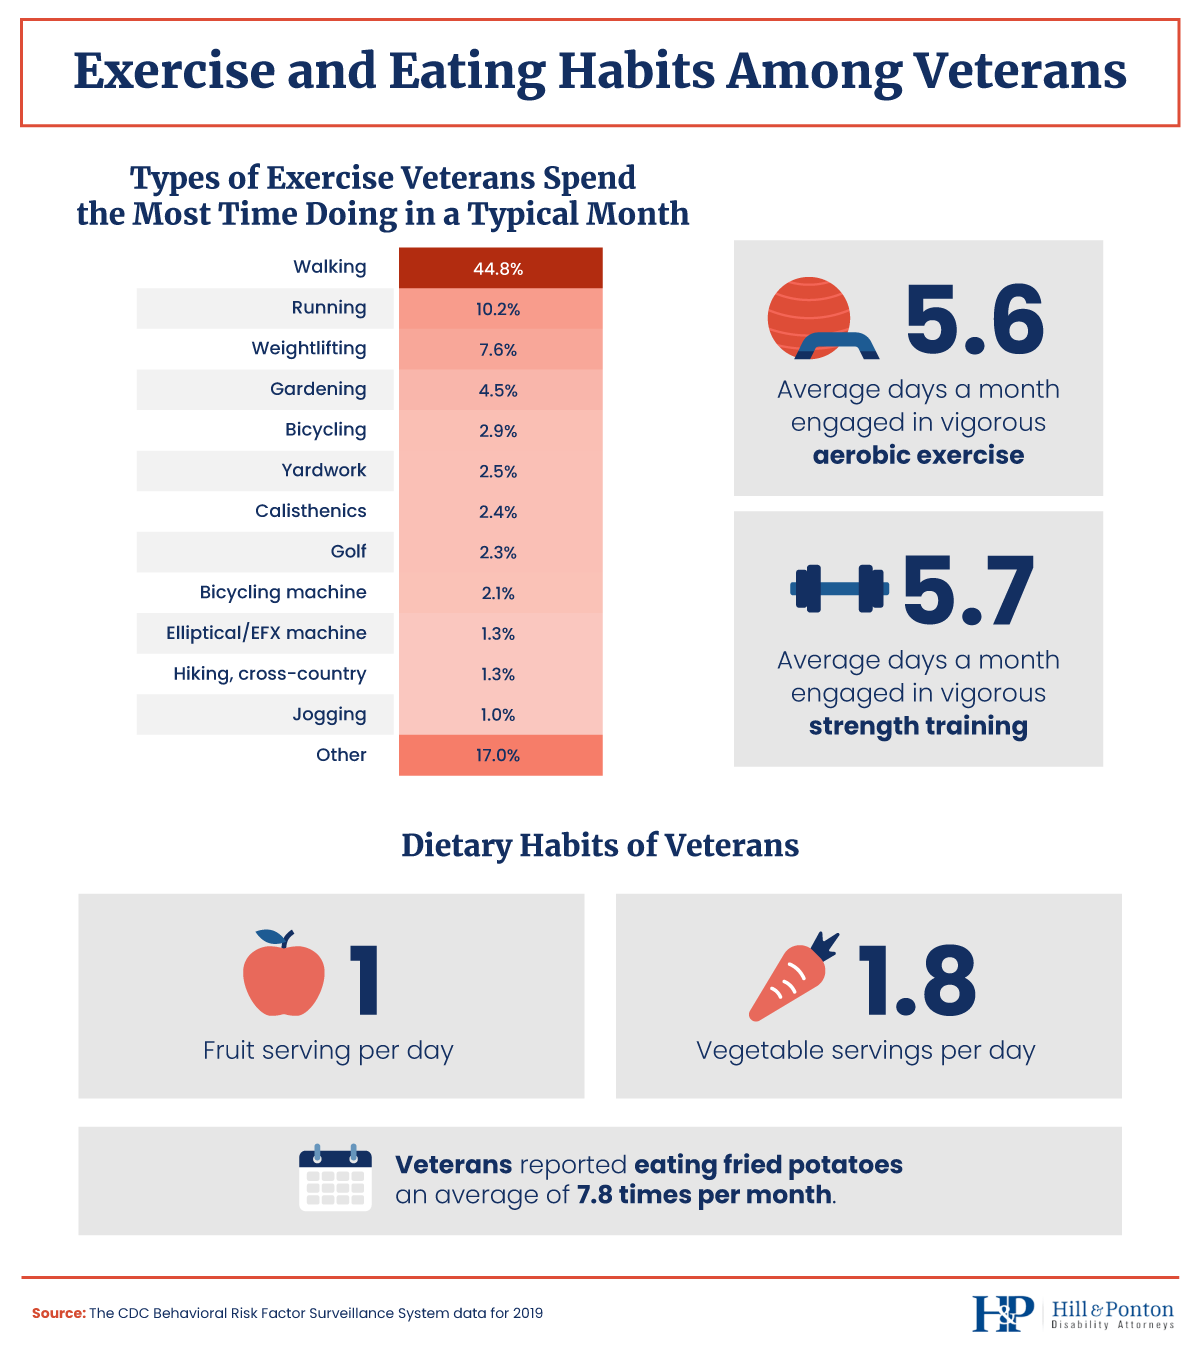 Exercise and Eating Habits Among Veterans